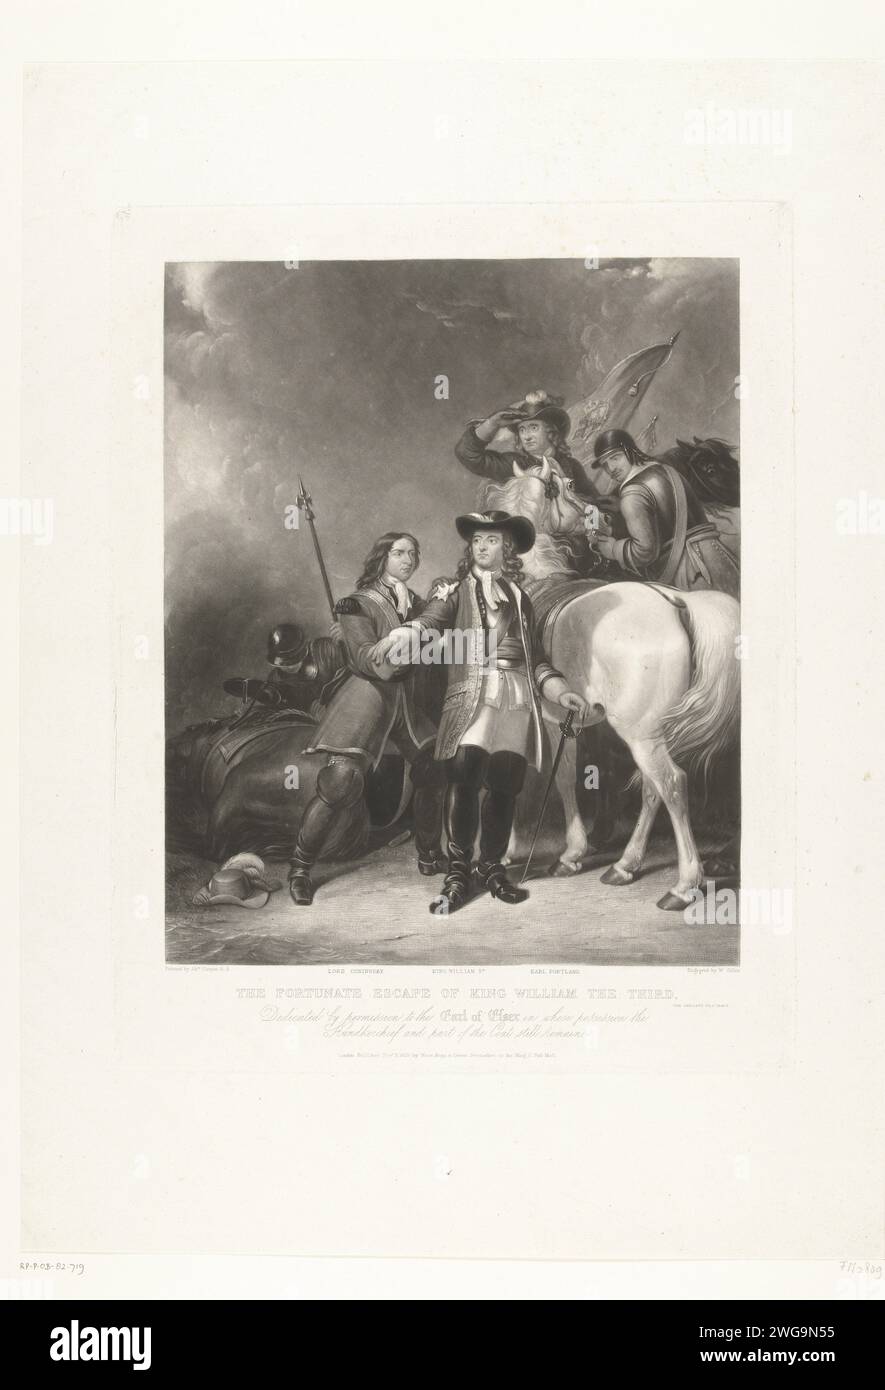 William III on the shoulder injured at the Battle of the Boyne, 1690, 1829 print William III on the shoulder injured at the Battle of the Boyne on July 11, 1690. Lord Coningsby stuffs the bleeding shoulder wound of William III with a handkerchief, right on horseback the count of Portland. The print is dedicated to the Earl of Essex that owned the handkerchief in question and a part of Willem III jacket. print maker: Englandafter painting by: Englandpublisher: London paper  medical aid and nursing of the sick and wounded during the battle Boyne Battlesite Stock Photo